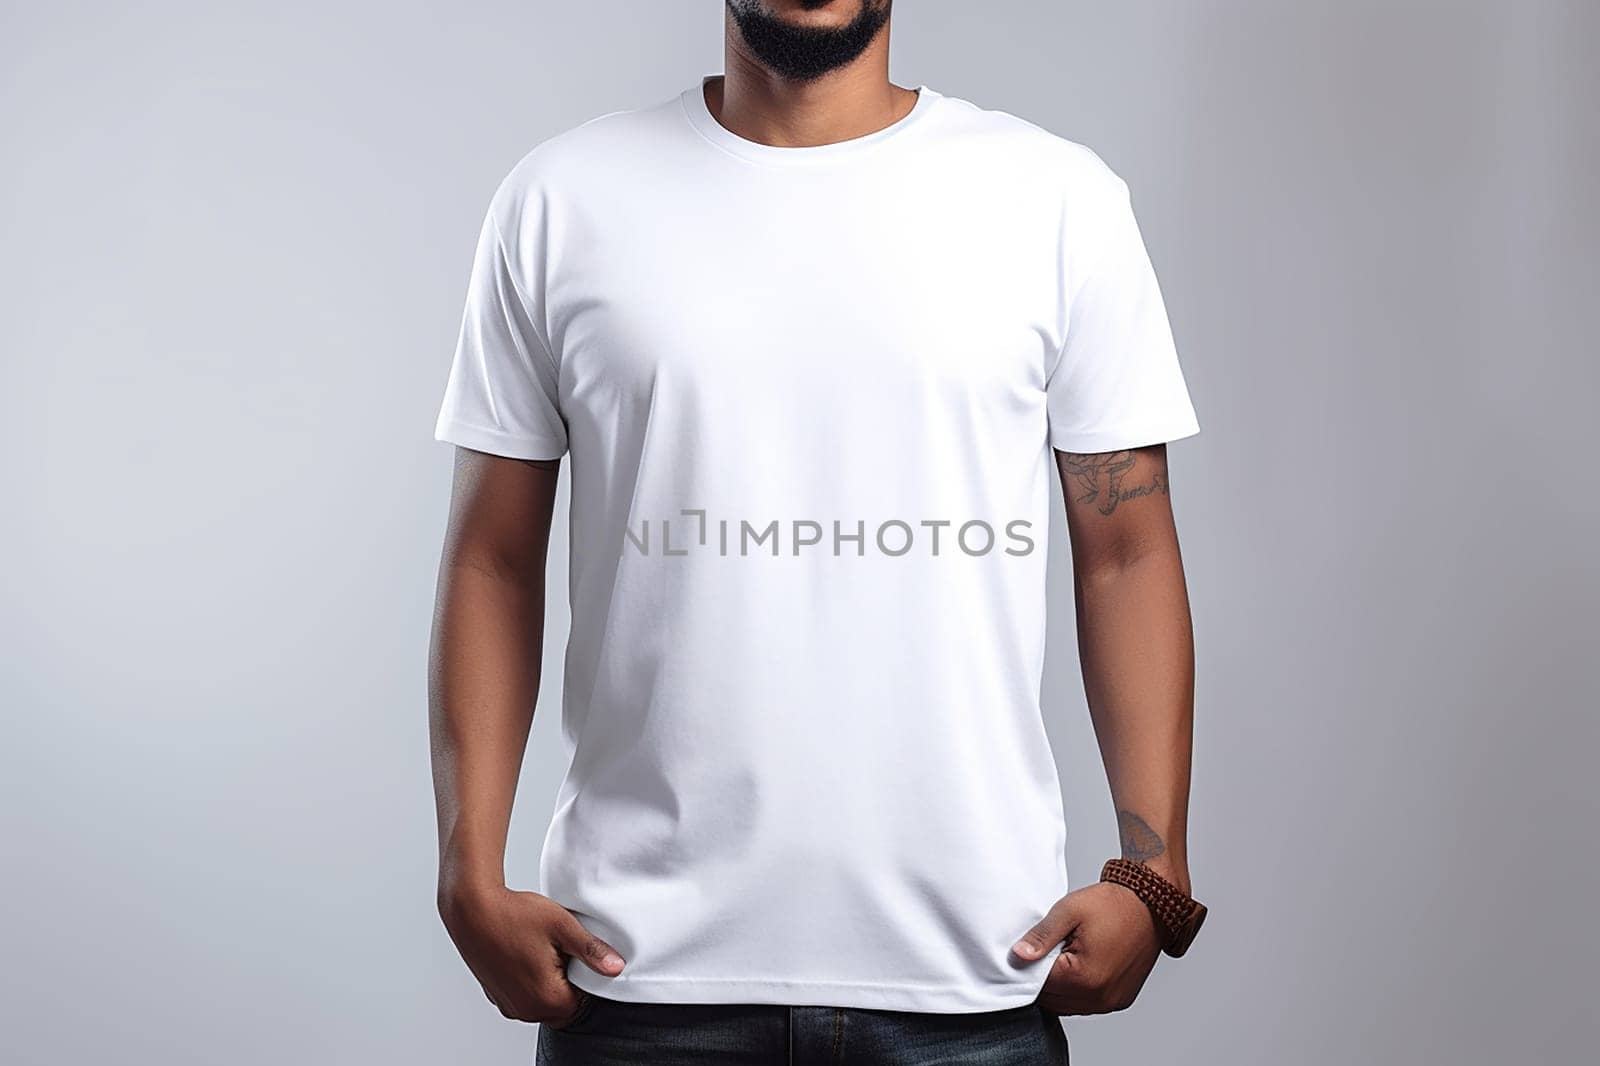 A mock up with a person wearing a plain white t-shirt stands against a grey background. by Hype2art